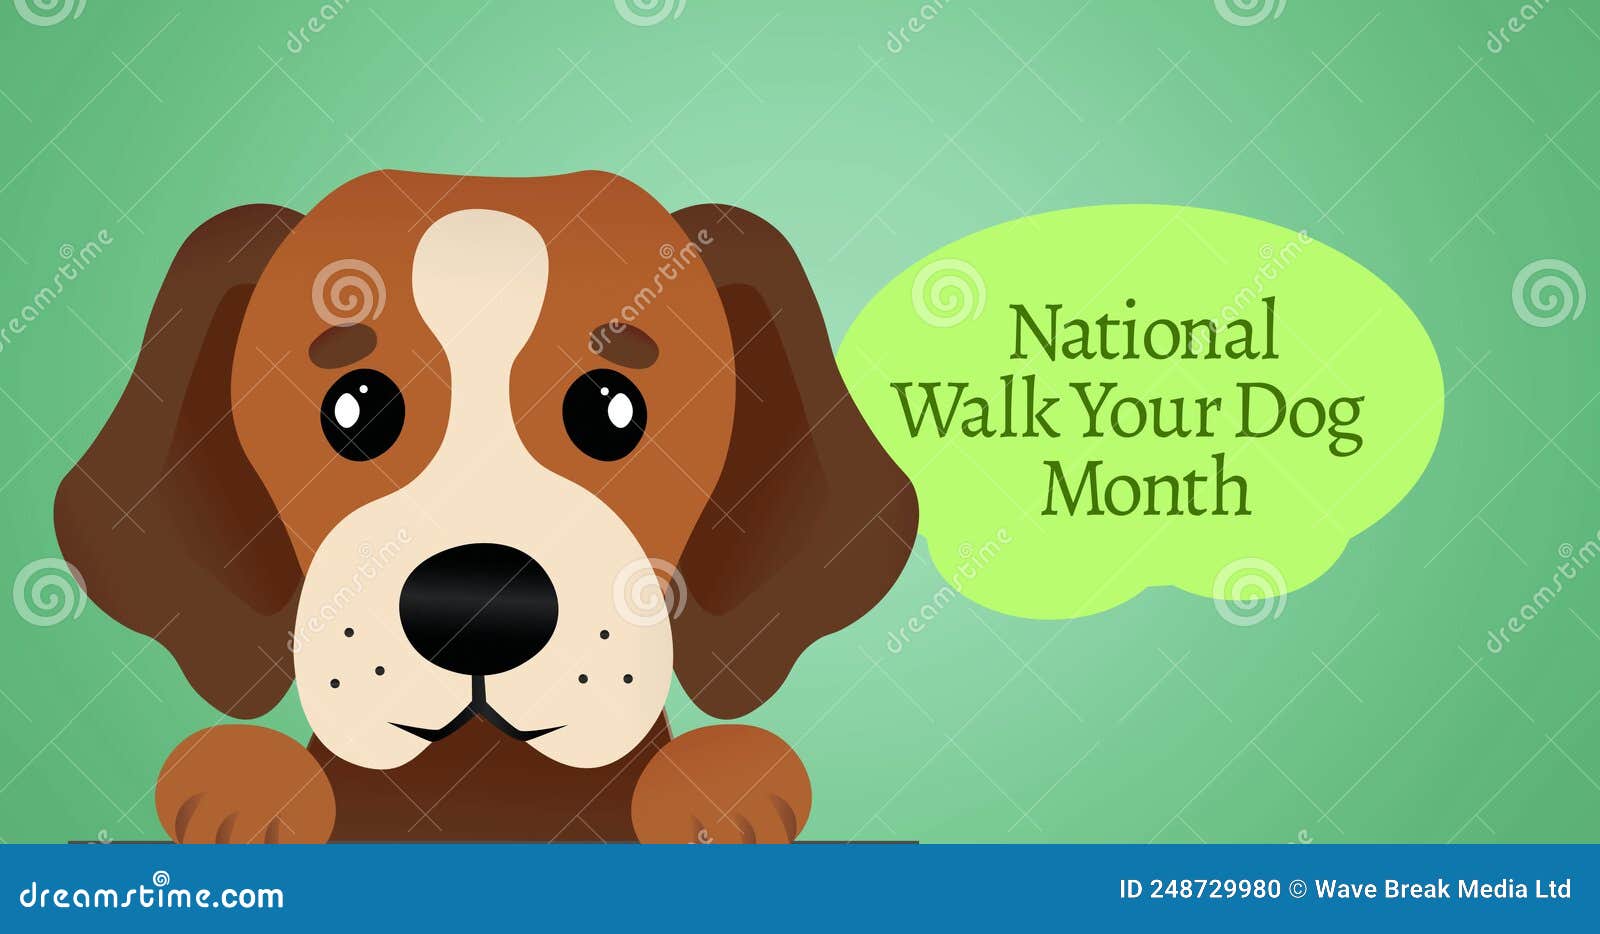 Image of National Walk Your Dog Month Text in Green, Over Illustration